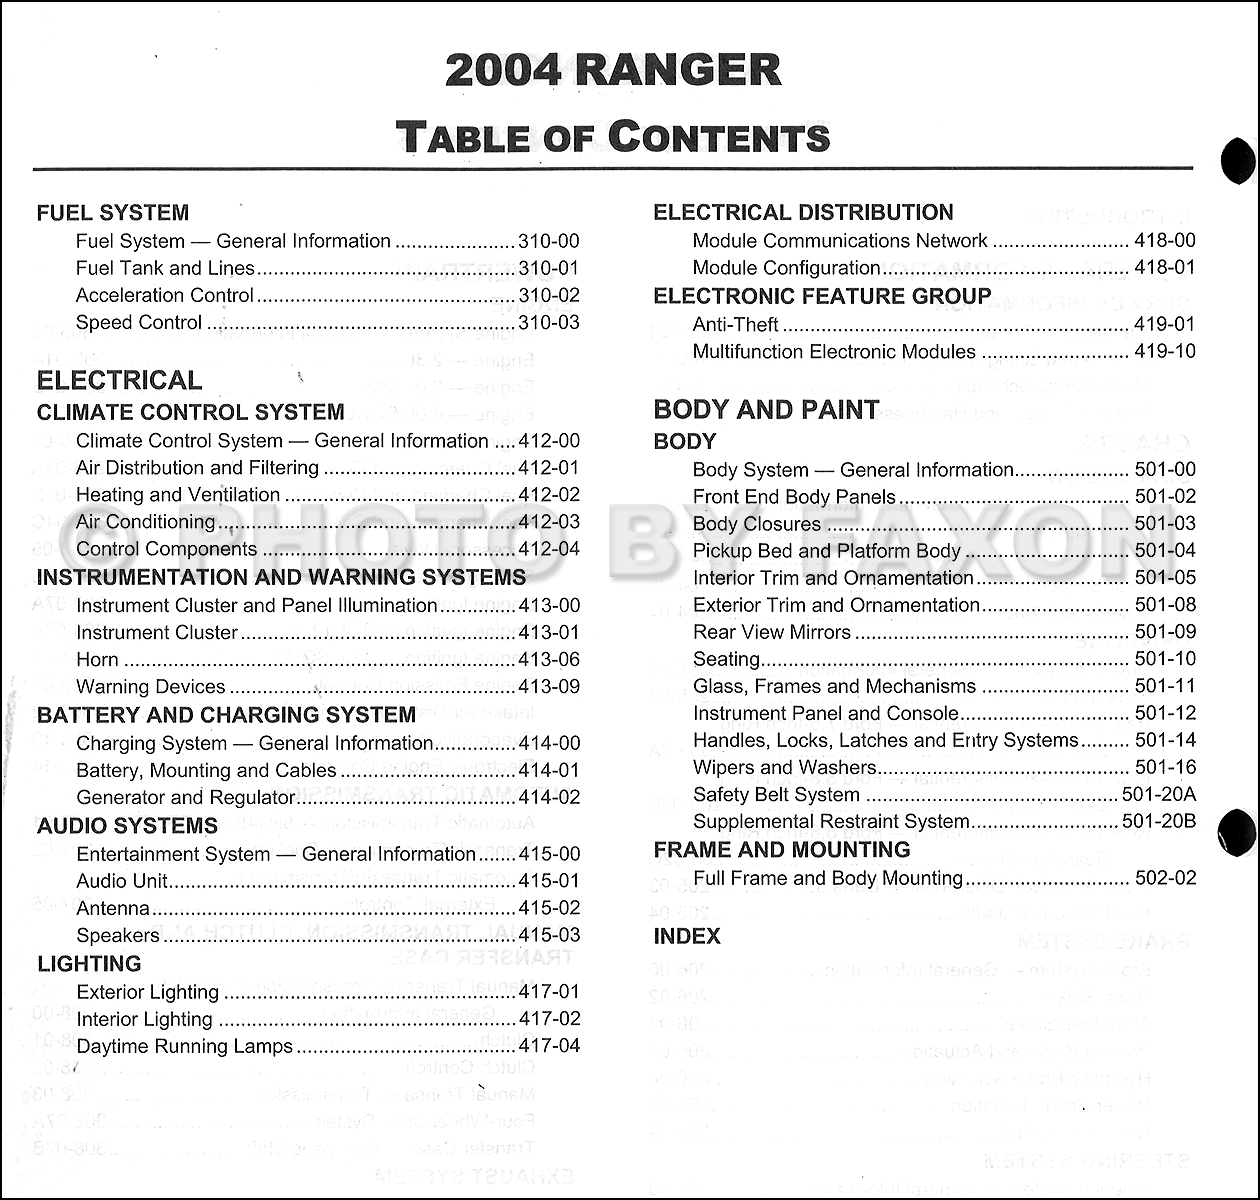 2004 Ford ranger xlt owners manual #10